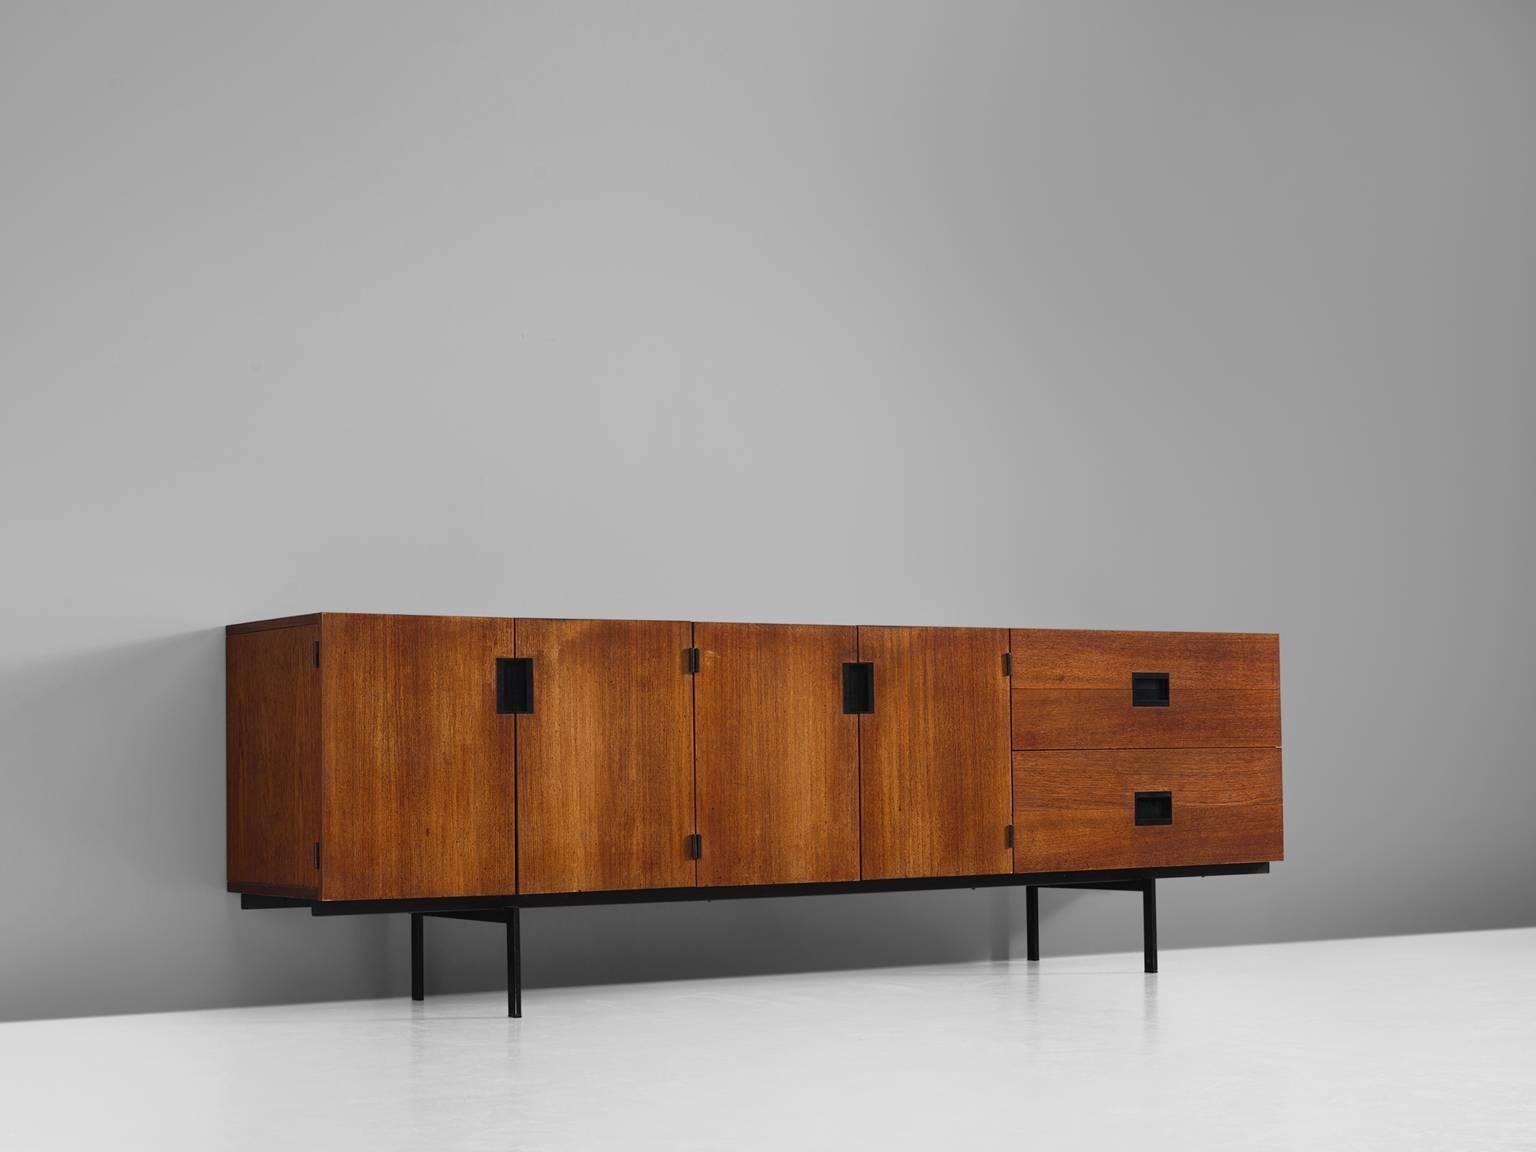 Sideboard model DU03, in teak and metal, by Cees Braakman for UMS Pastoe, The Netherlands, design 1958, production 1960s.

Elegant and modest teak sideboard by Cees Braakman for UMS Pastoe. This sideboard consists of a small metal base, which